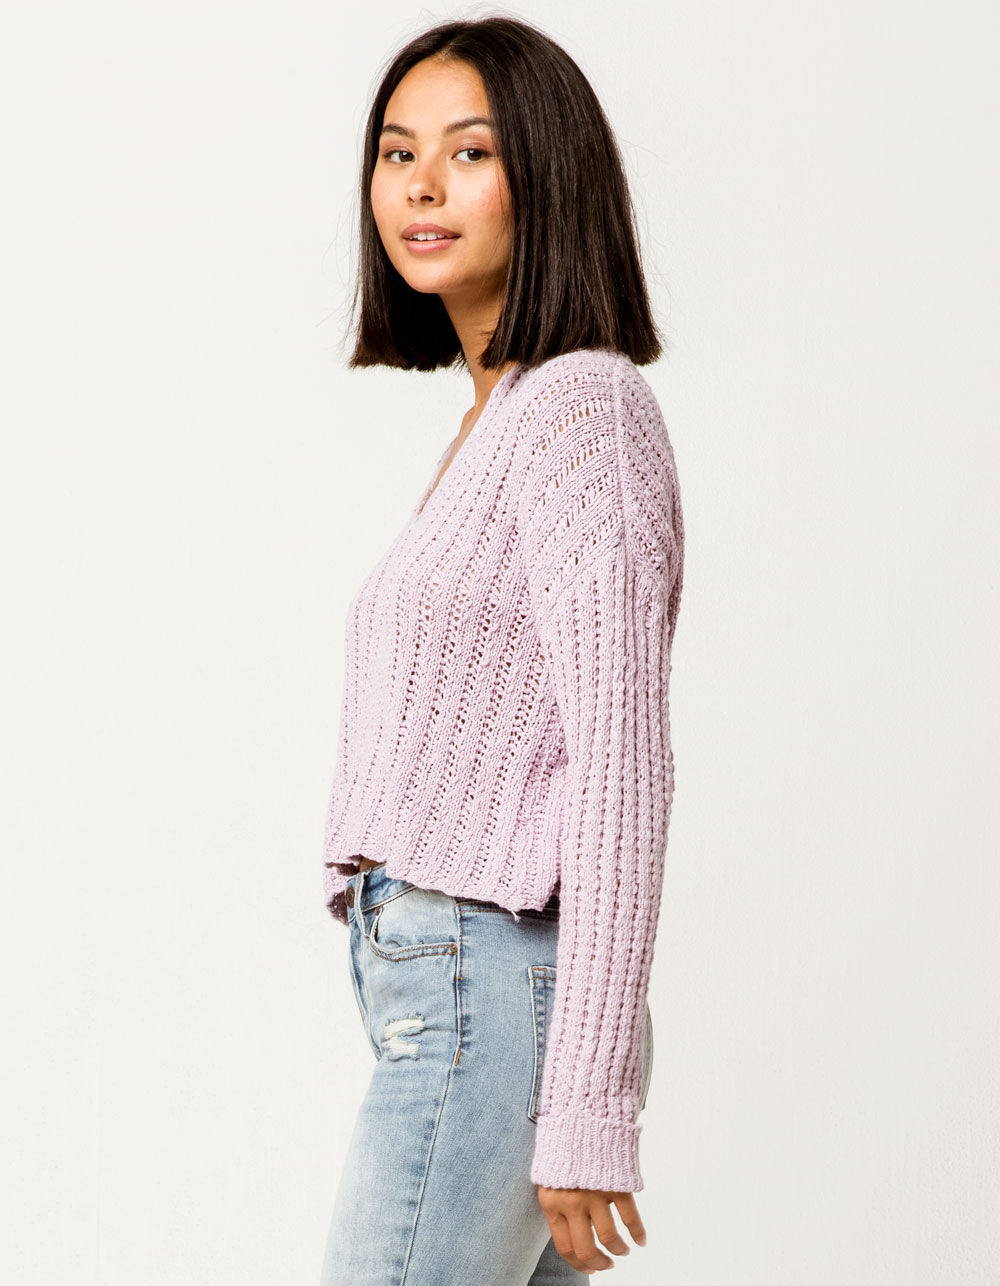 SKY AND SPARROW Open Weave Lavender Womens Sweater - LAVENDER | Tillys